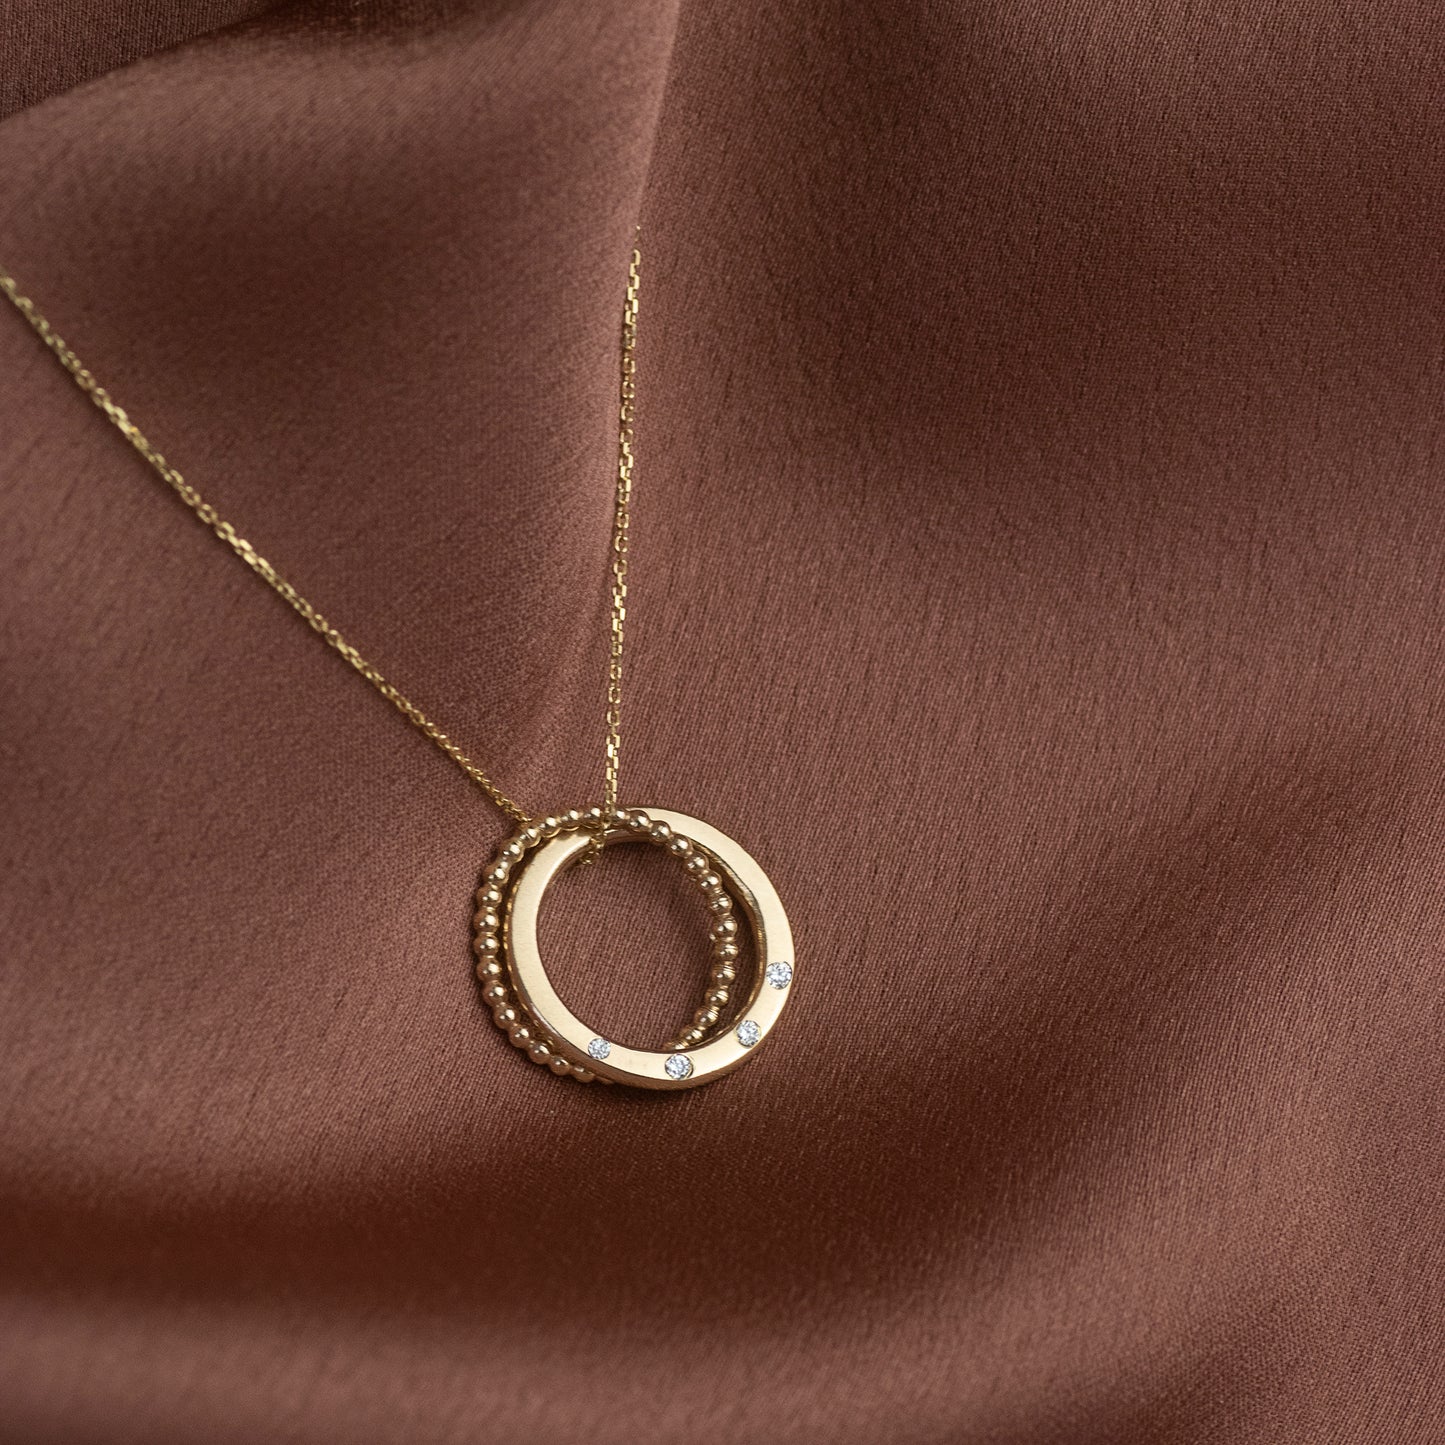 4th Anniversary Necklace - 4 Diamonds for 4 Years - 9kt Gold